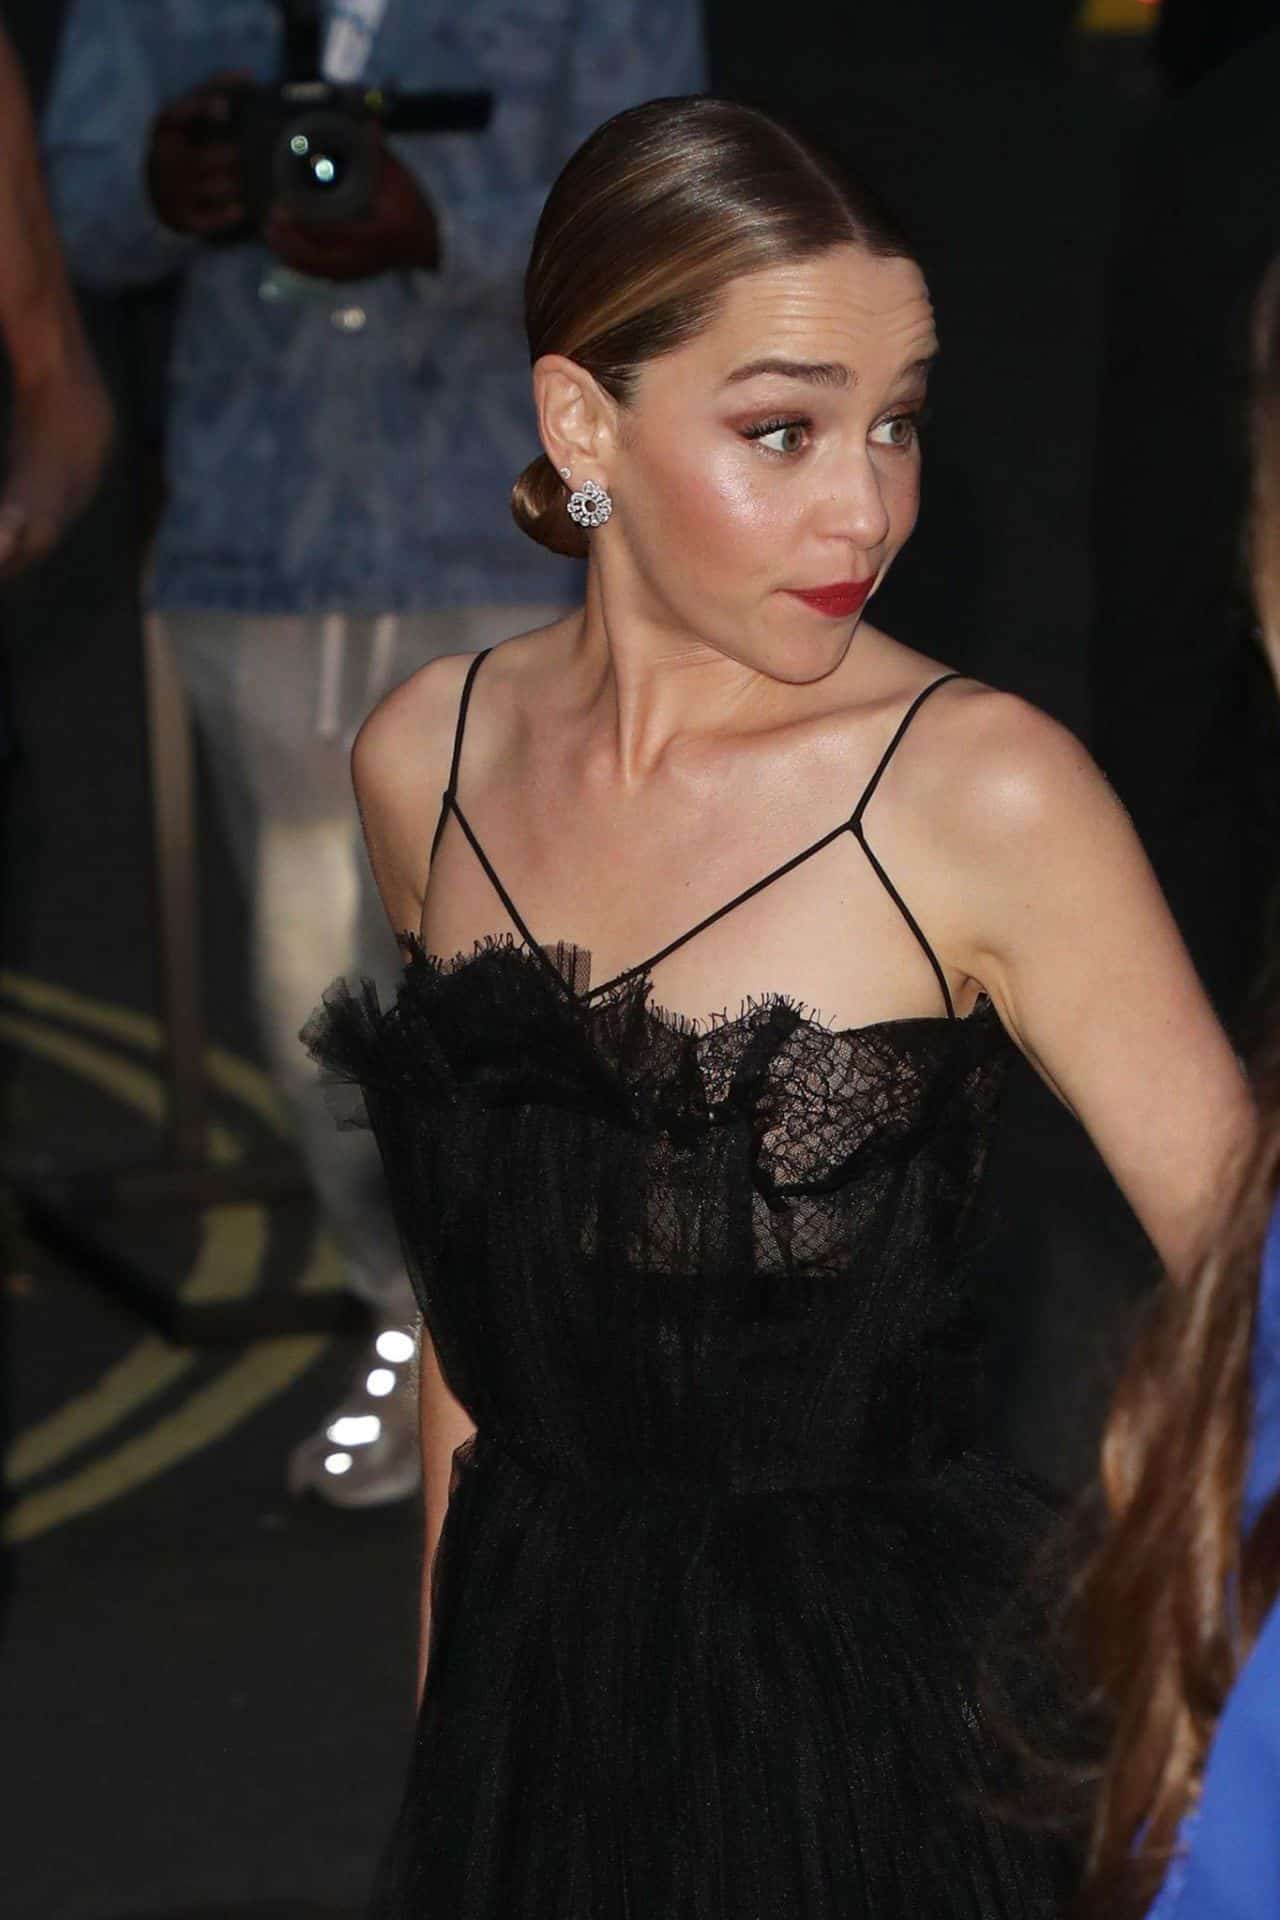 Emilia Clarke Dazzles in Cut-Out Black Gown at Vogue World Show